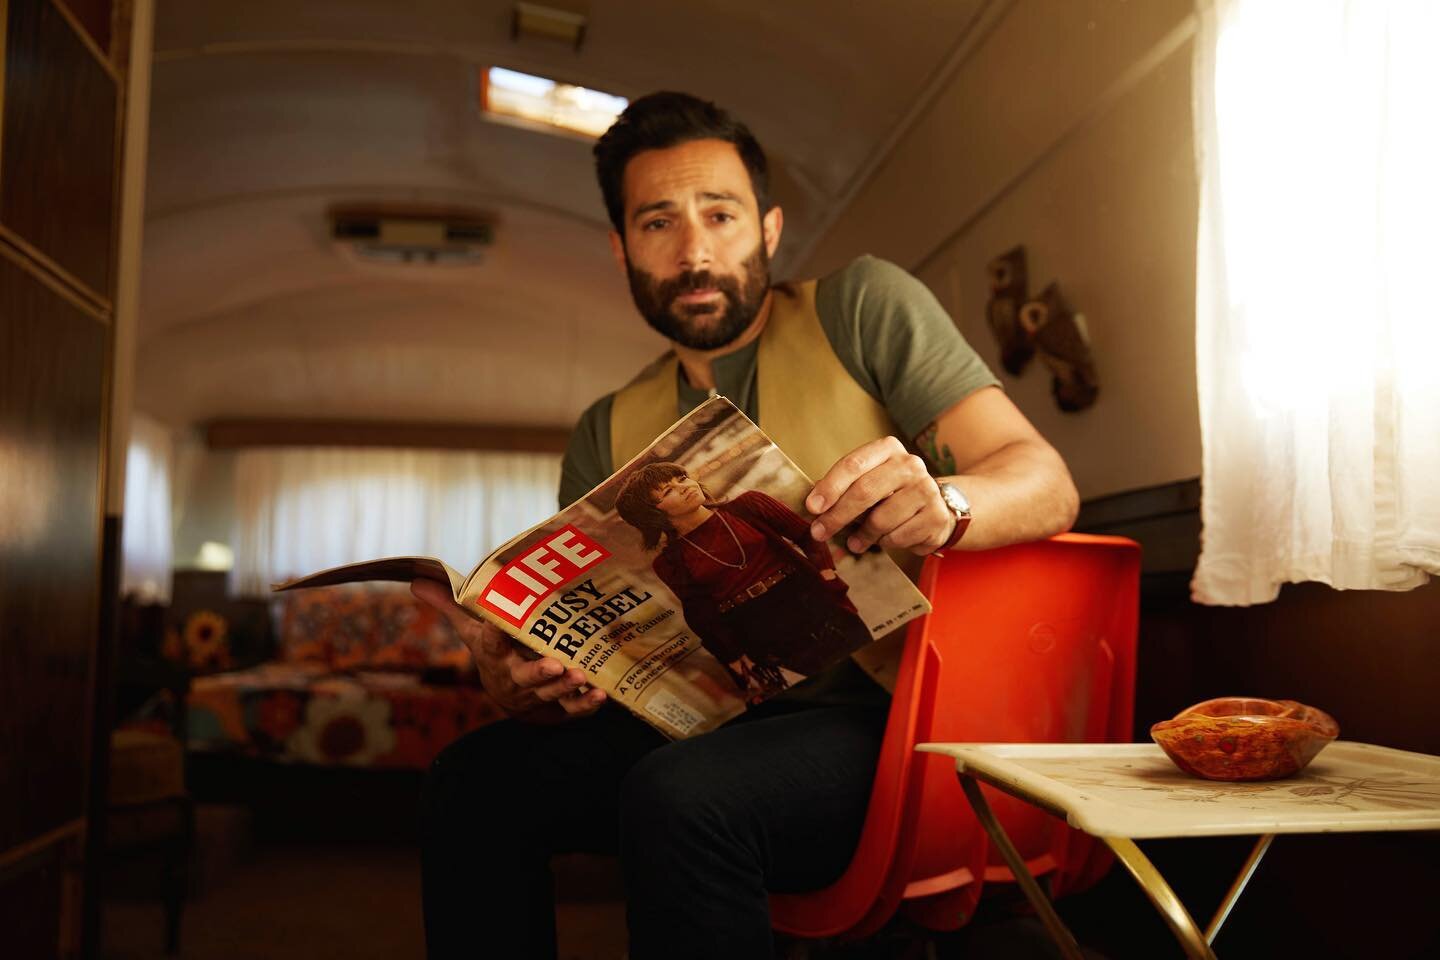 Here&rsquo;s where you&rsquo;d normally see a profoundly insightful quote from a favorite author or maybe some choice lyrics from one of my own songs. Instead it&rsquo;s just me, in an RV, reading Life magazine, saying &ldquo;have a nice weekend.&rdq